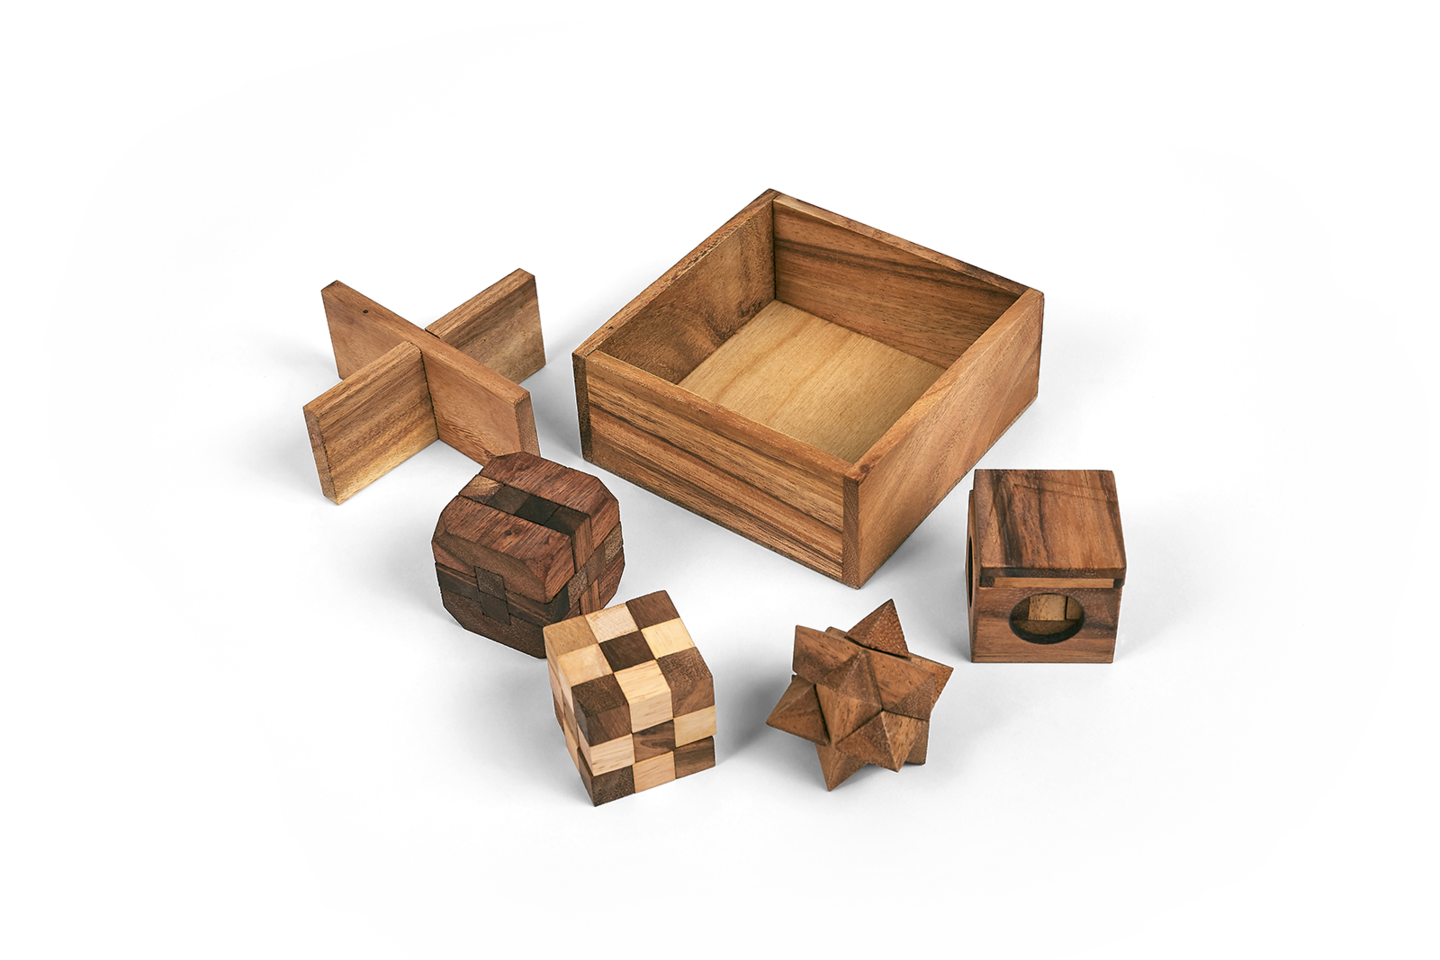 5 Puzzles In One Tricky Box